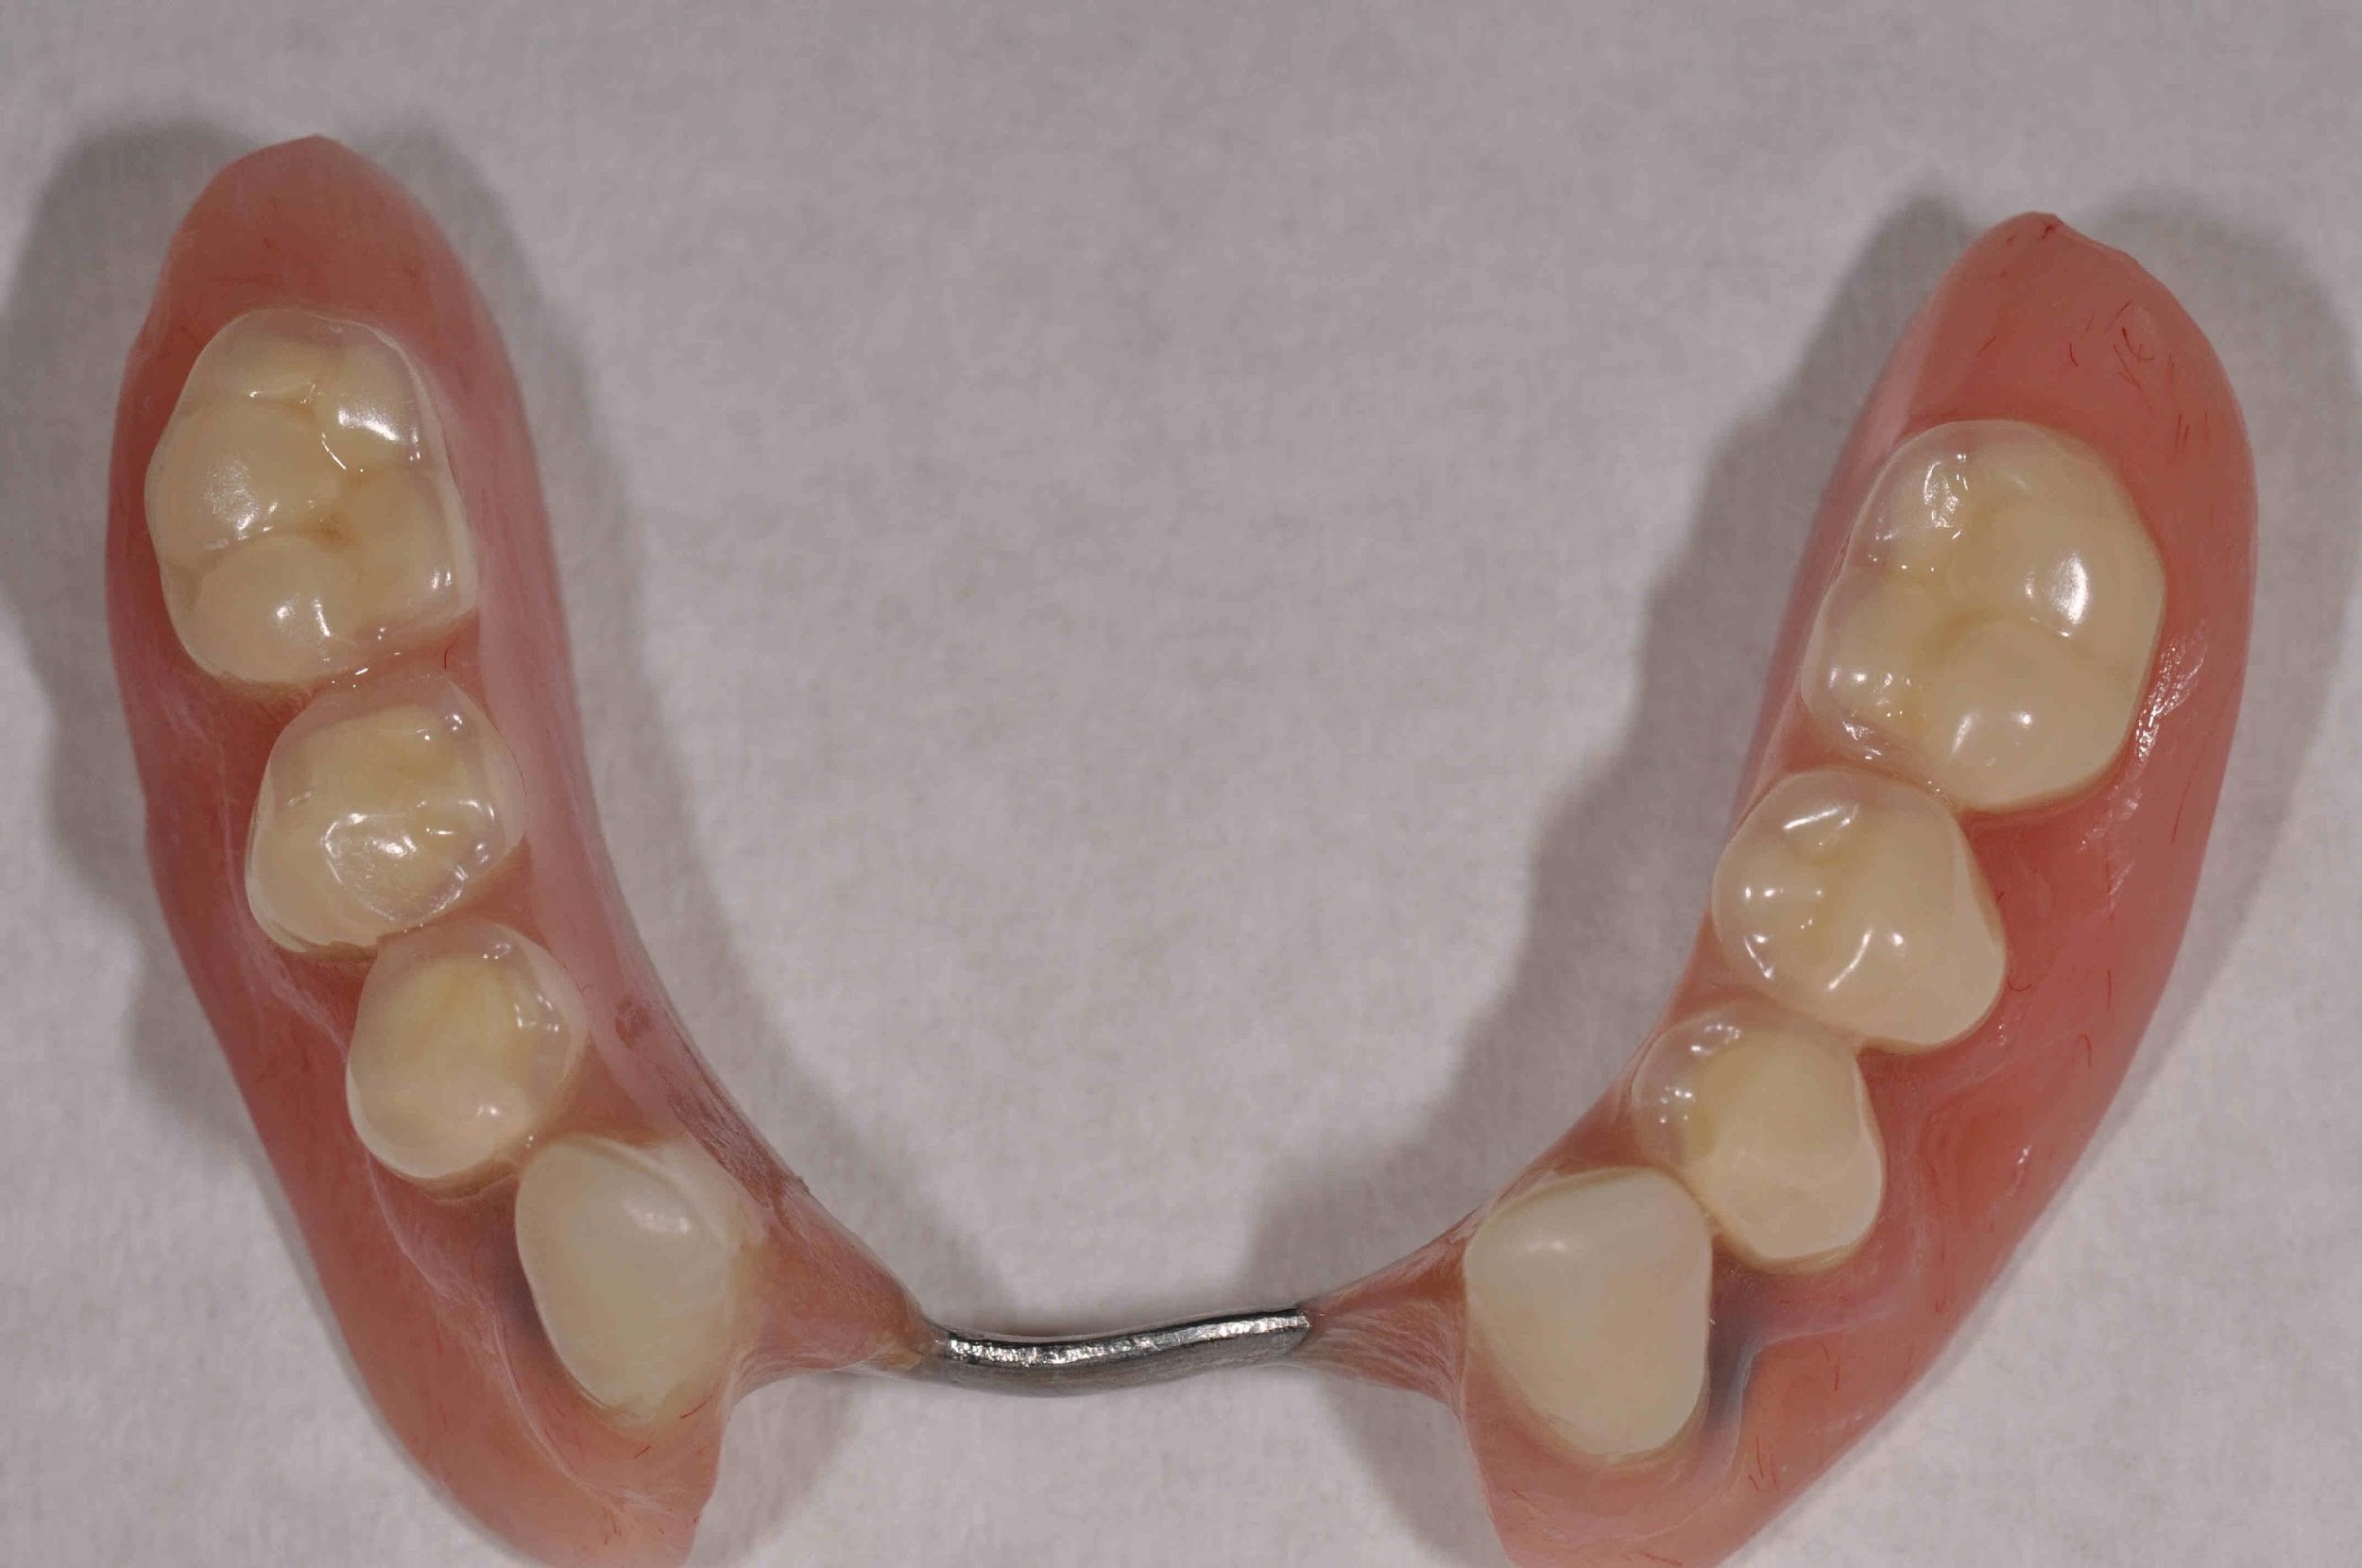 The simple design of the overdenture